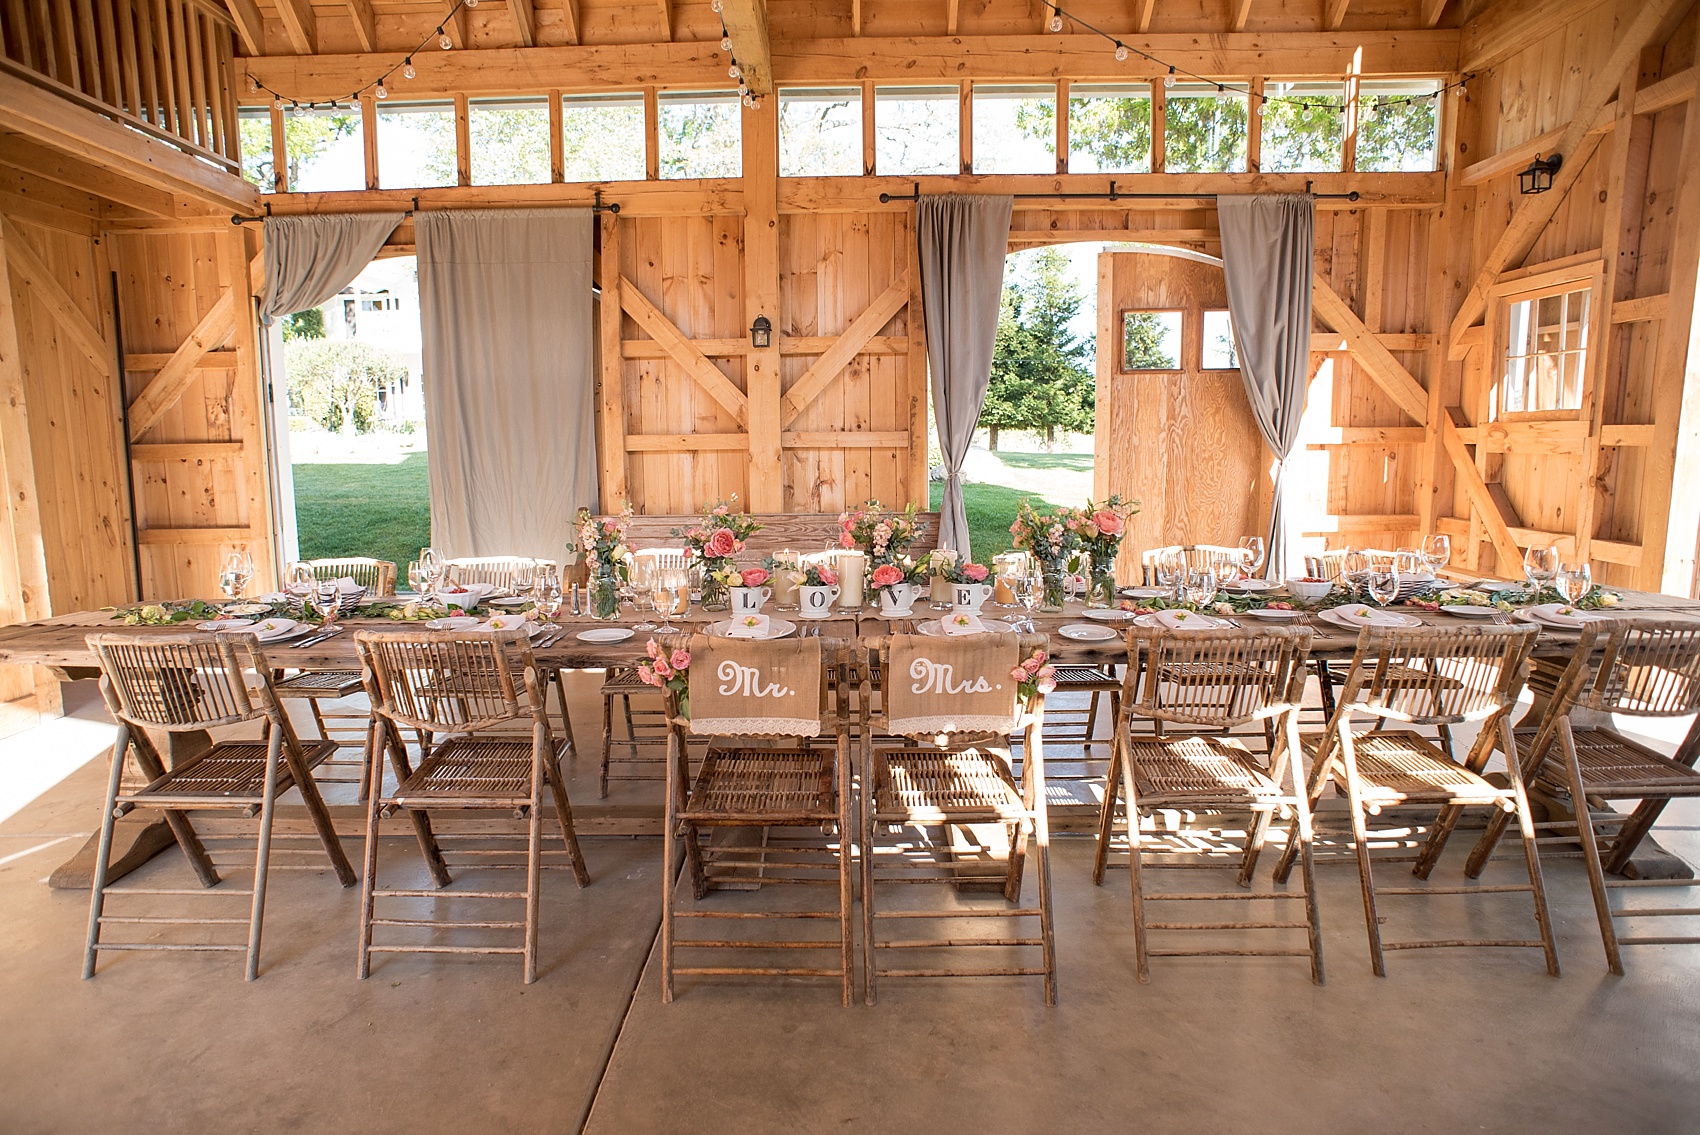 Spring vineyard elopement with barn reception and farm table. Photos by Mikkel Paige, destination wedding photographer. Held at HammerSky Vineyard, south of San Francisco. 